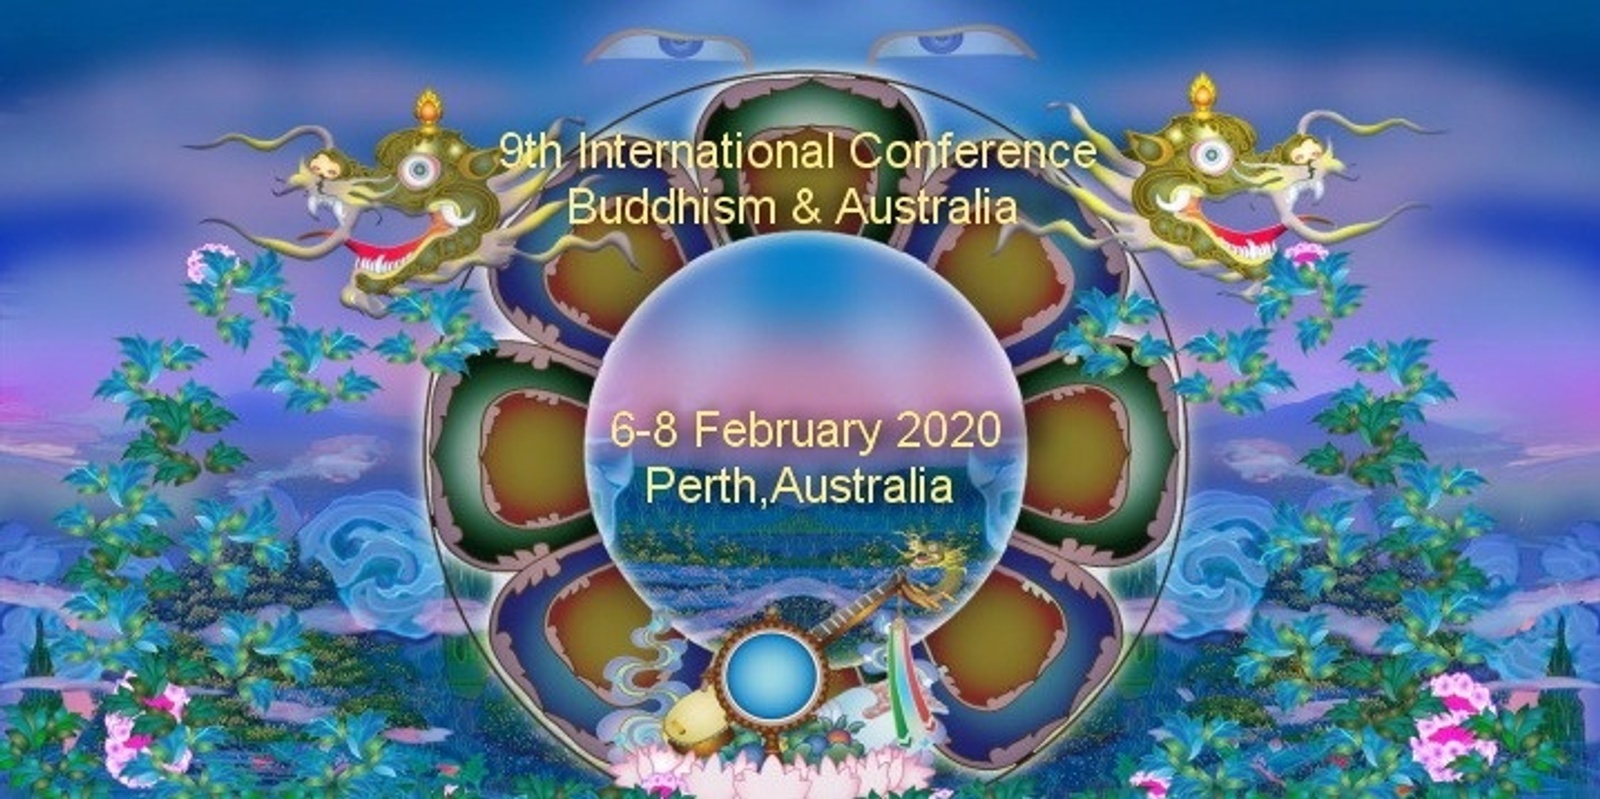 Banner image for 9th International Conference Buddhism & Australia